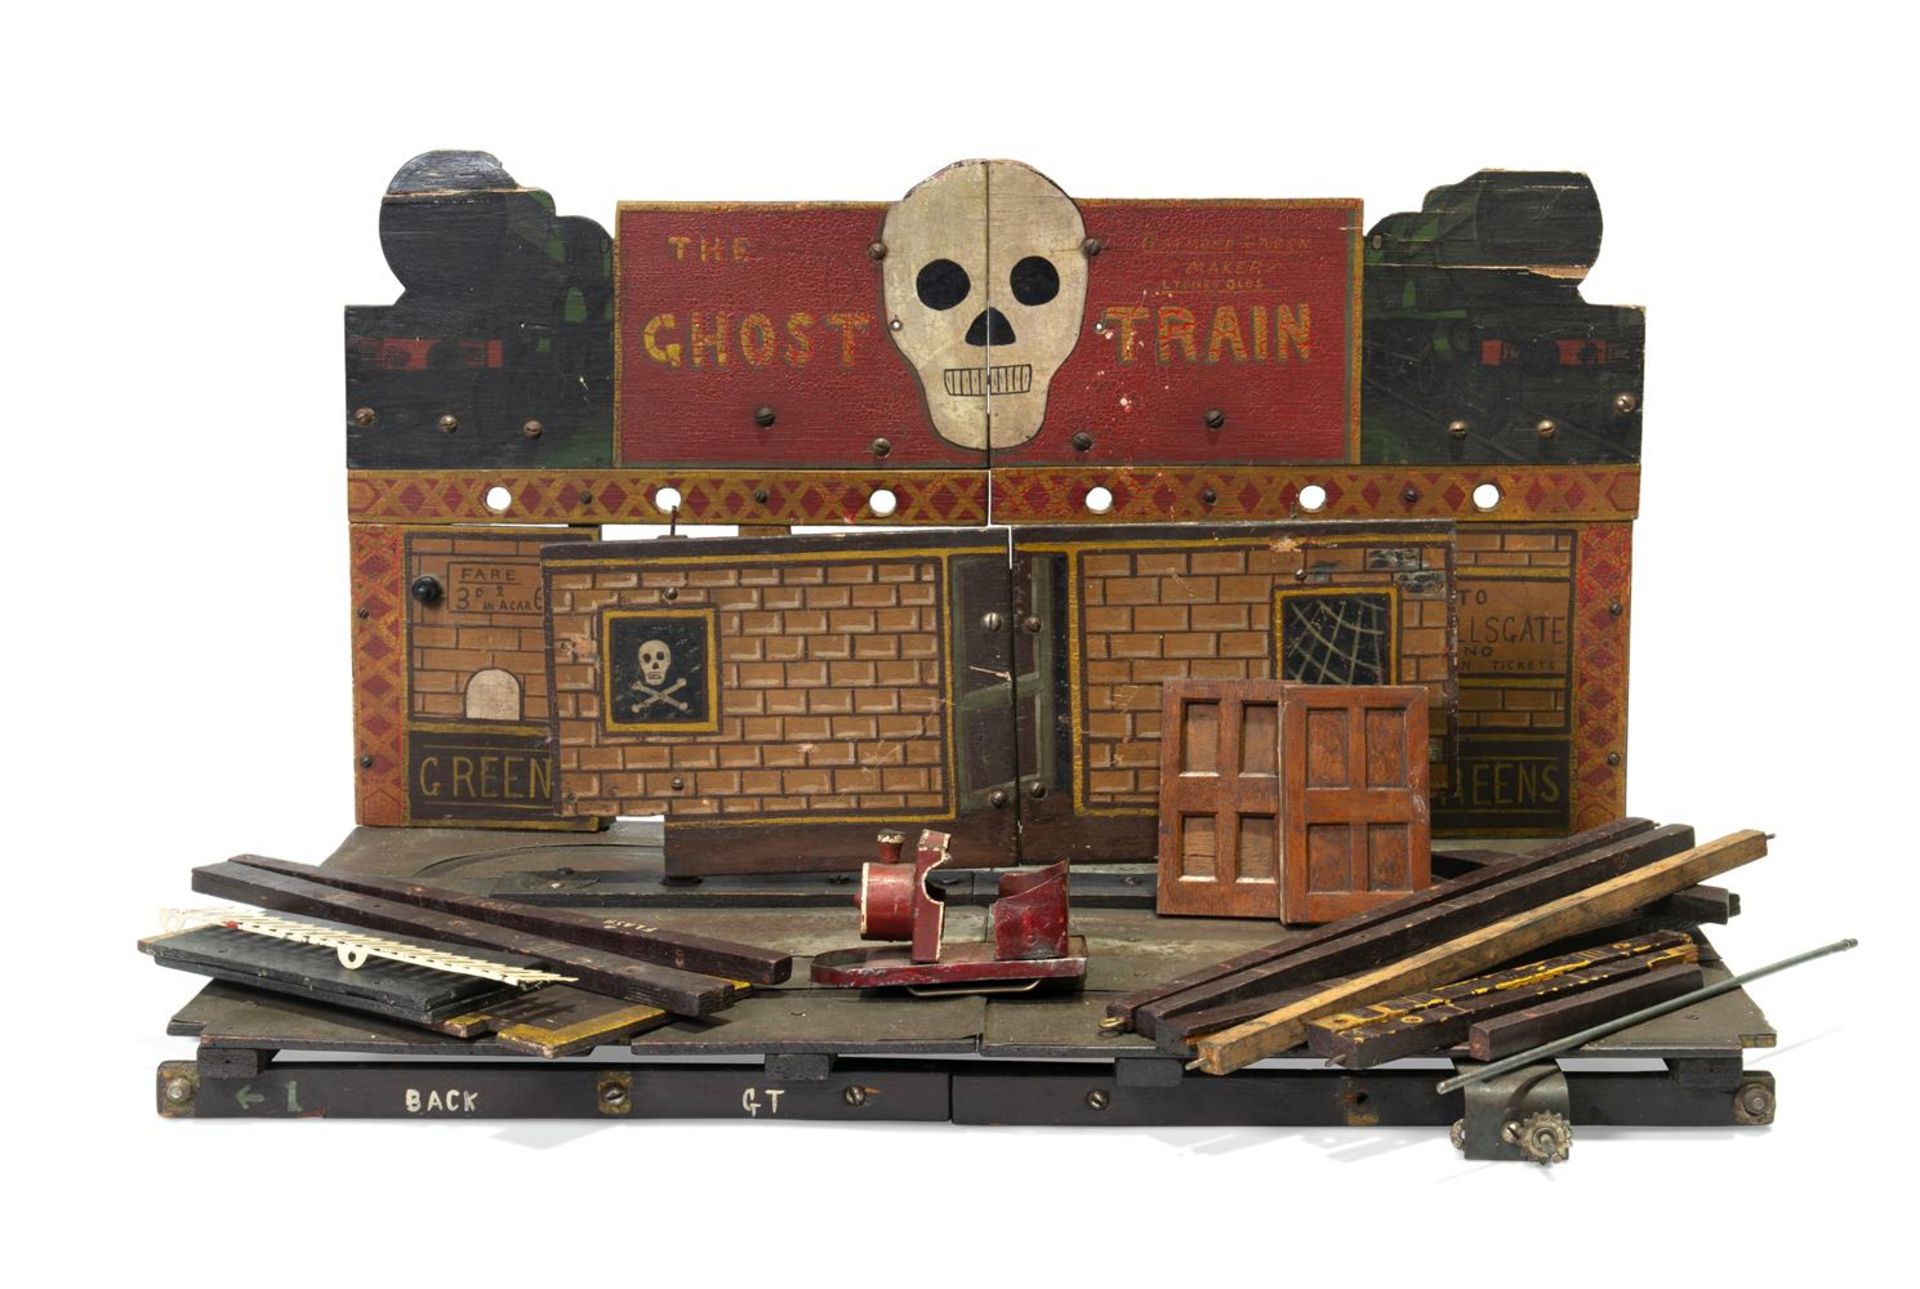 A SCRATCHBUILT PAINTED WOOD AND METAL SCALE MODEL AMUSEMENT GHOST TRAIN RIDE, 20TH CENTURY